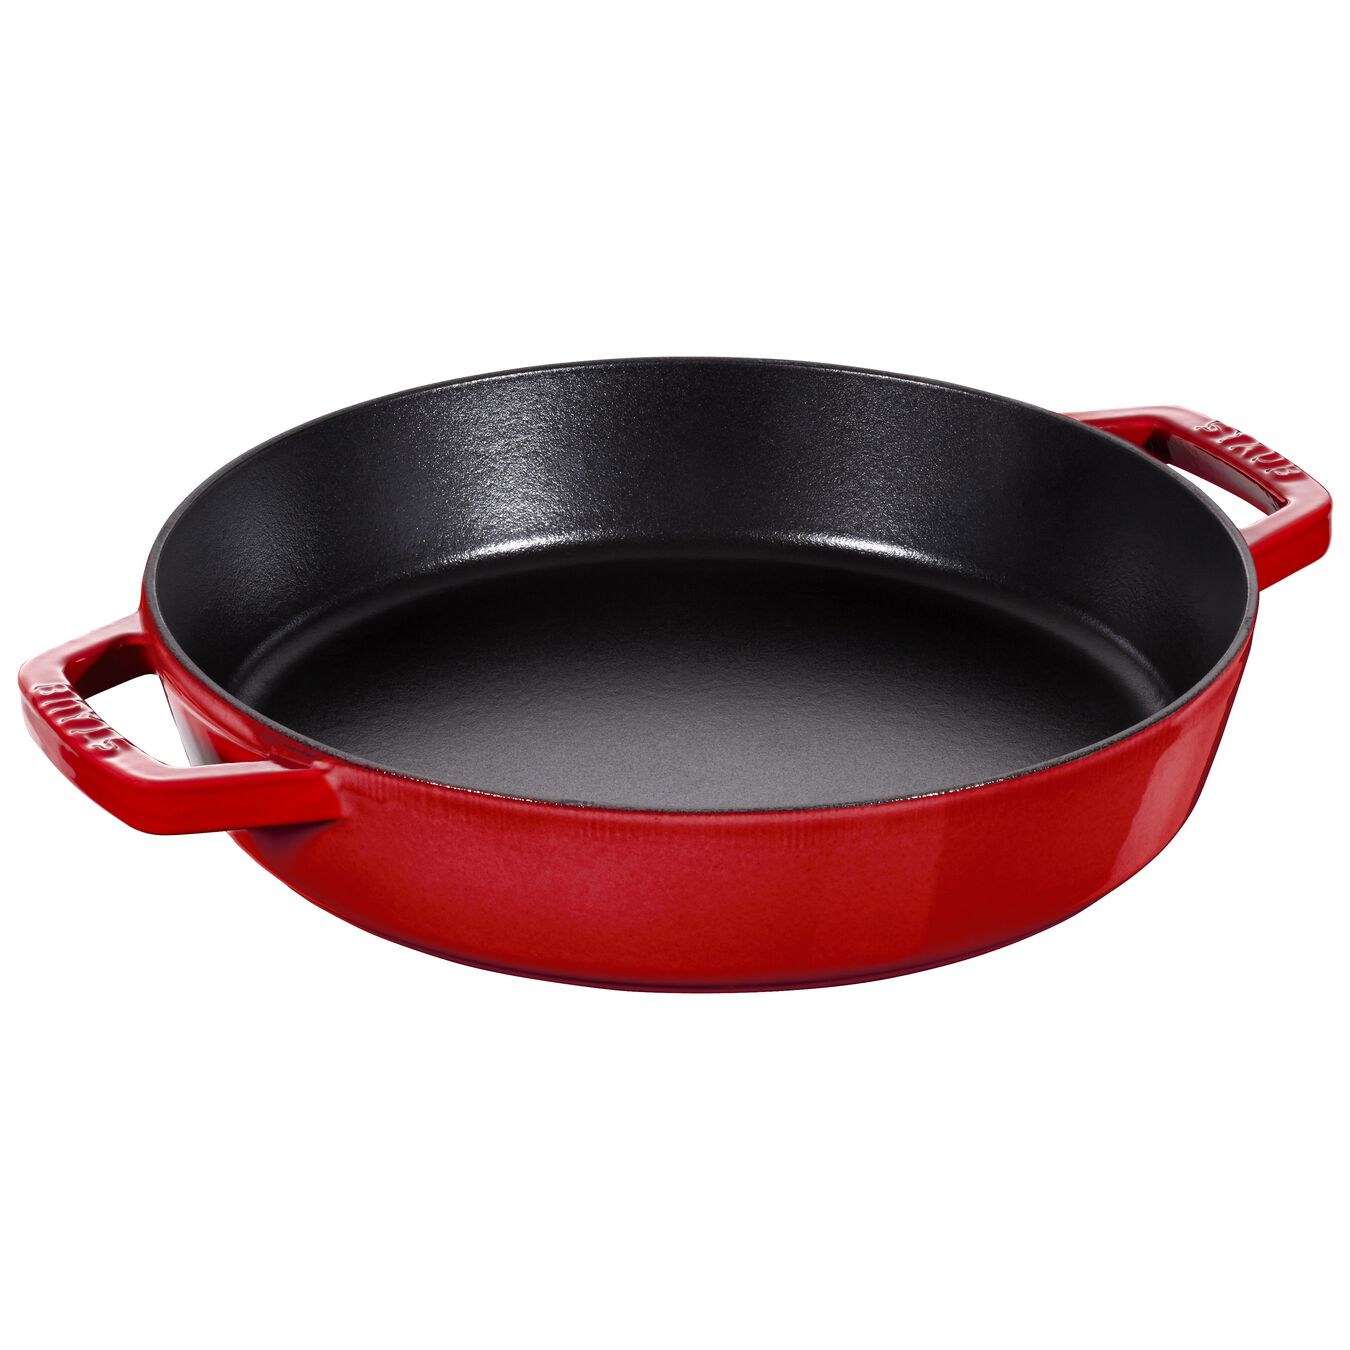 13-inch, Double Handle Fry Pan, cherry,,large 1